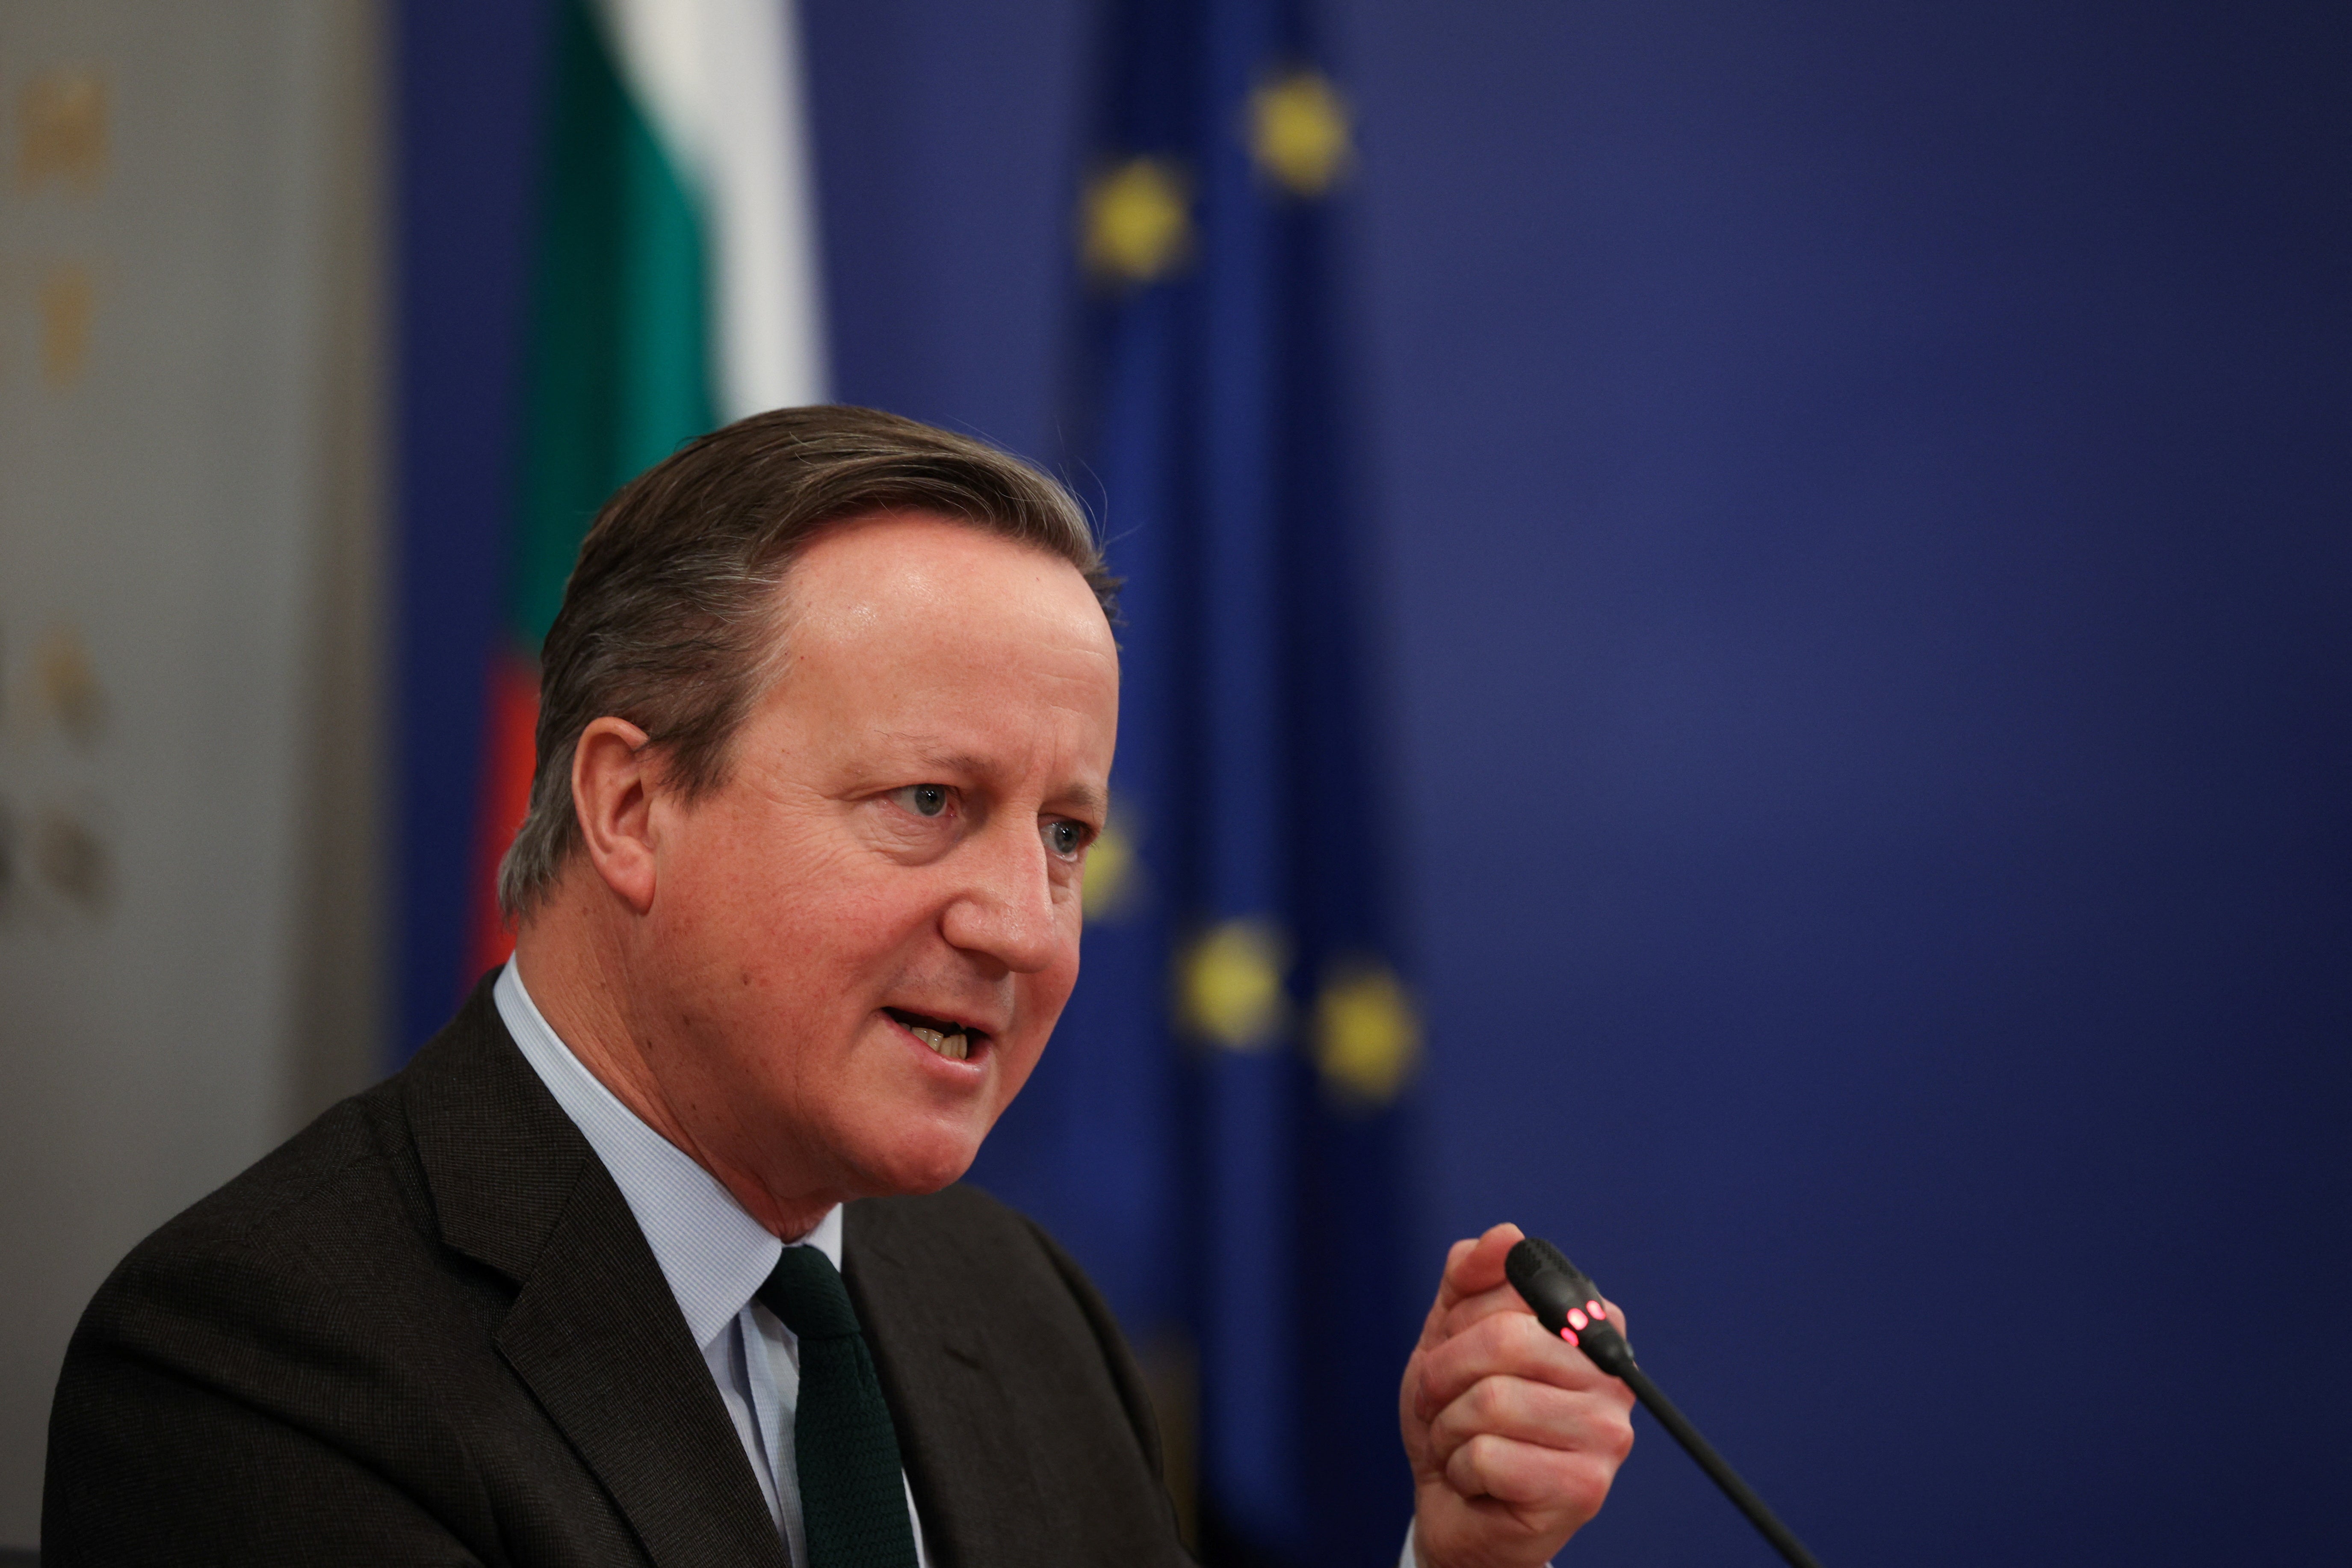 Cameron was quizzed by the European scrutiny committee